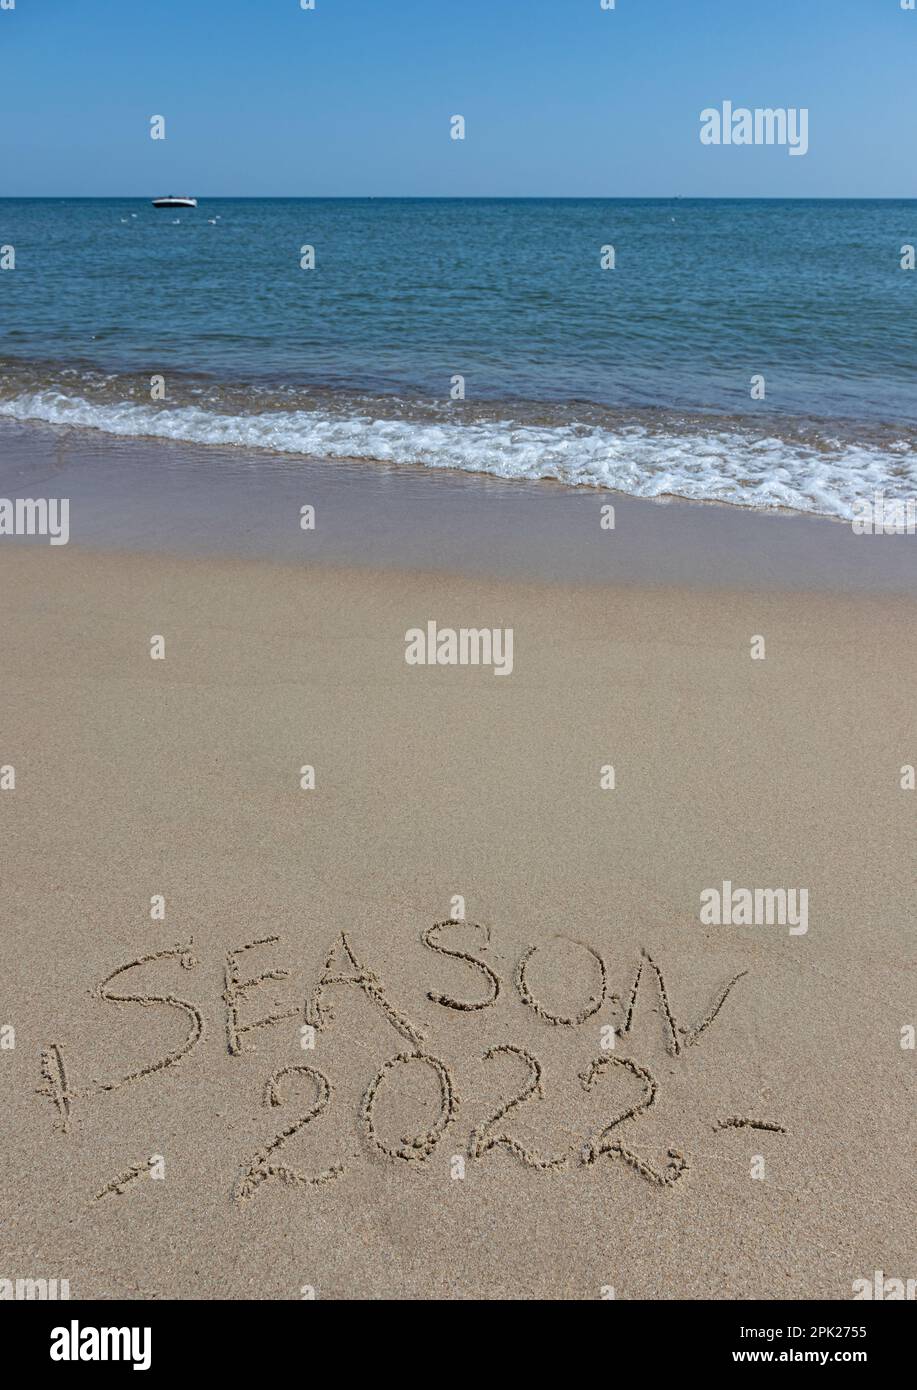 The inscription season 2022 on the sand by the water and the rising wave, seashore beach vacation by the sea. Stock Photo